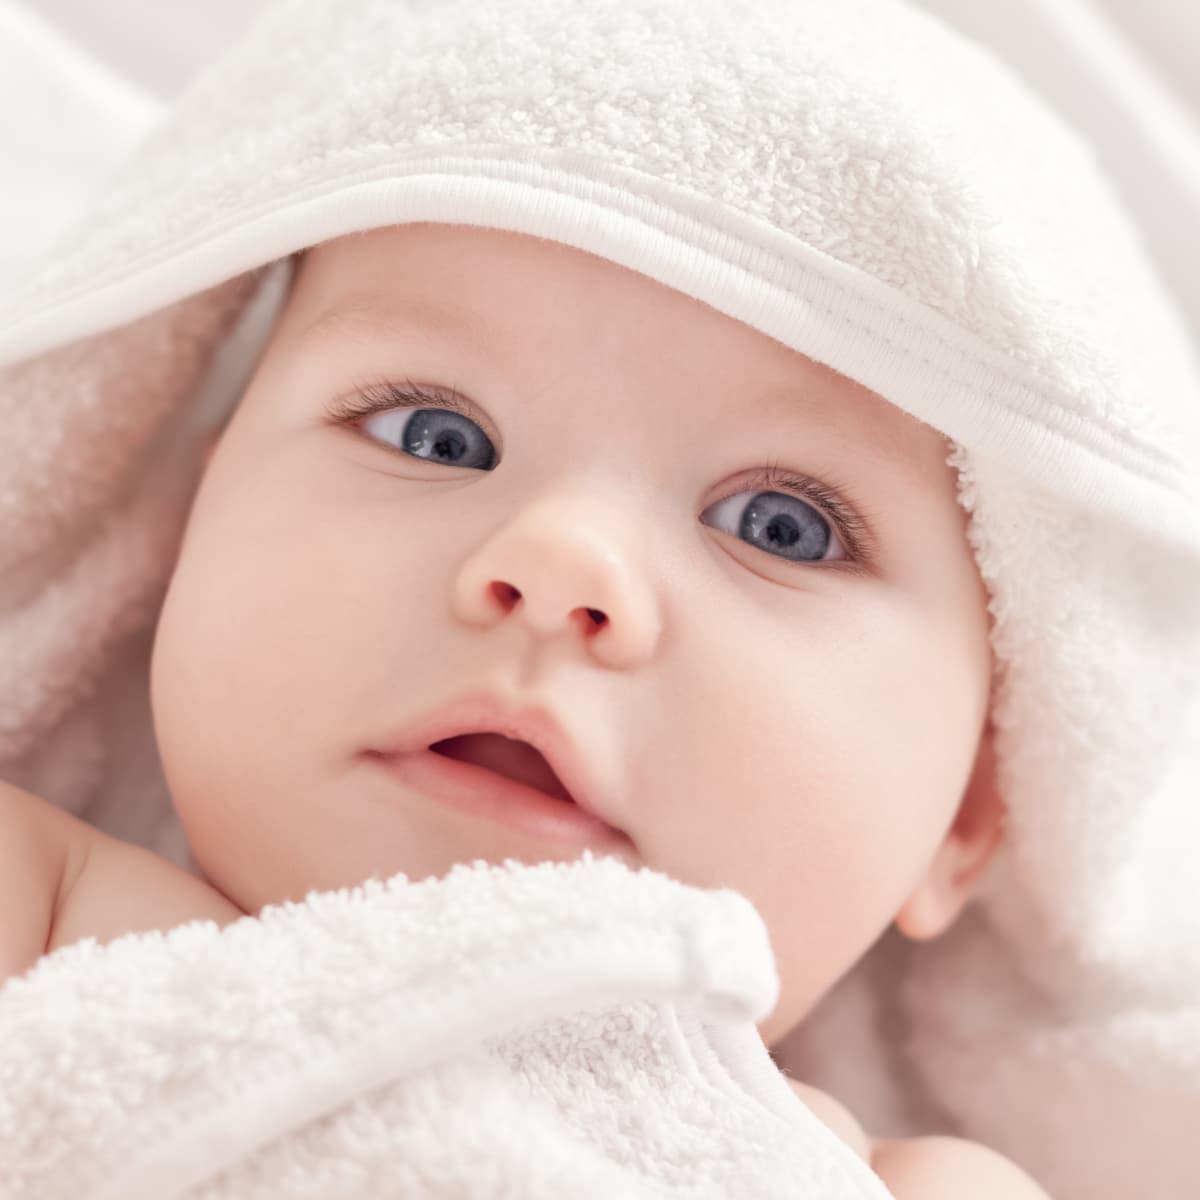 Close-up of baby wrapped in towel.